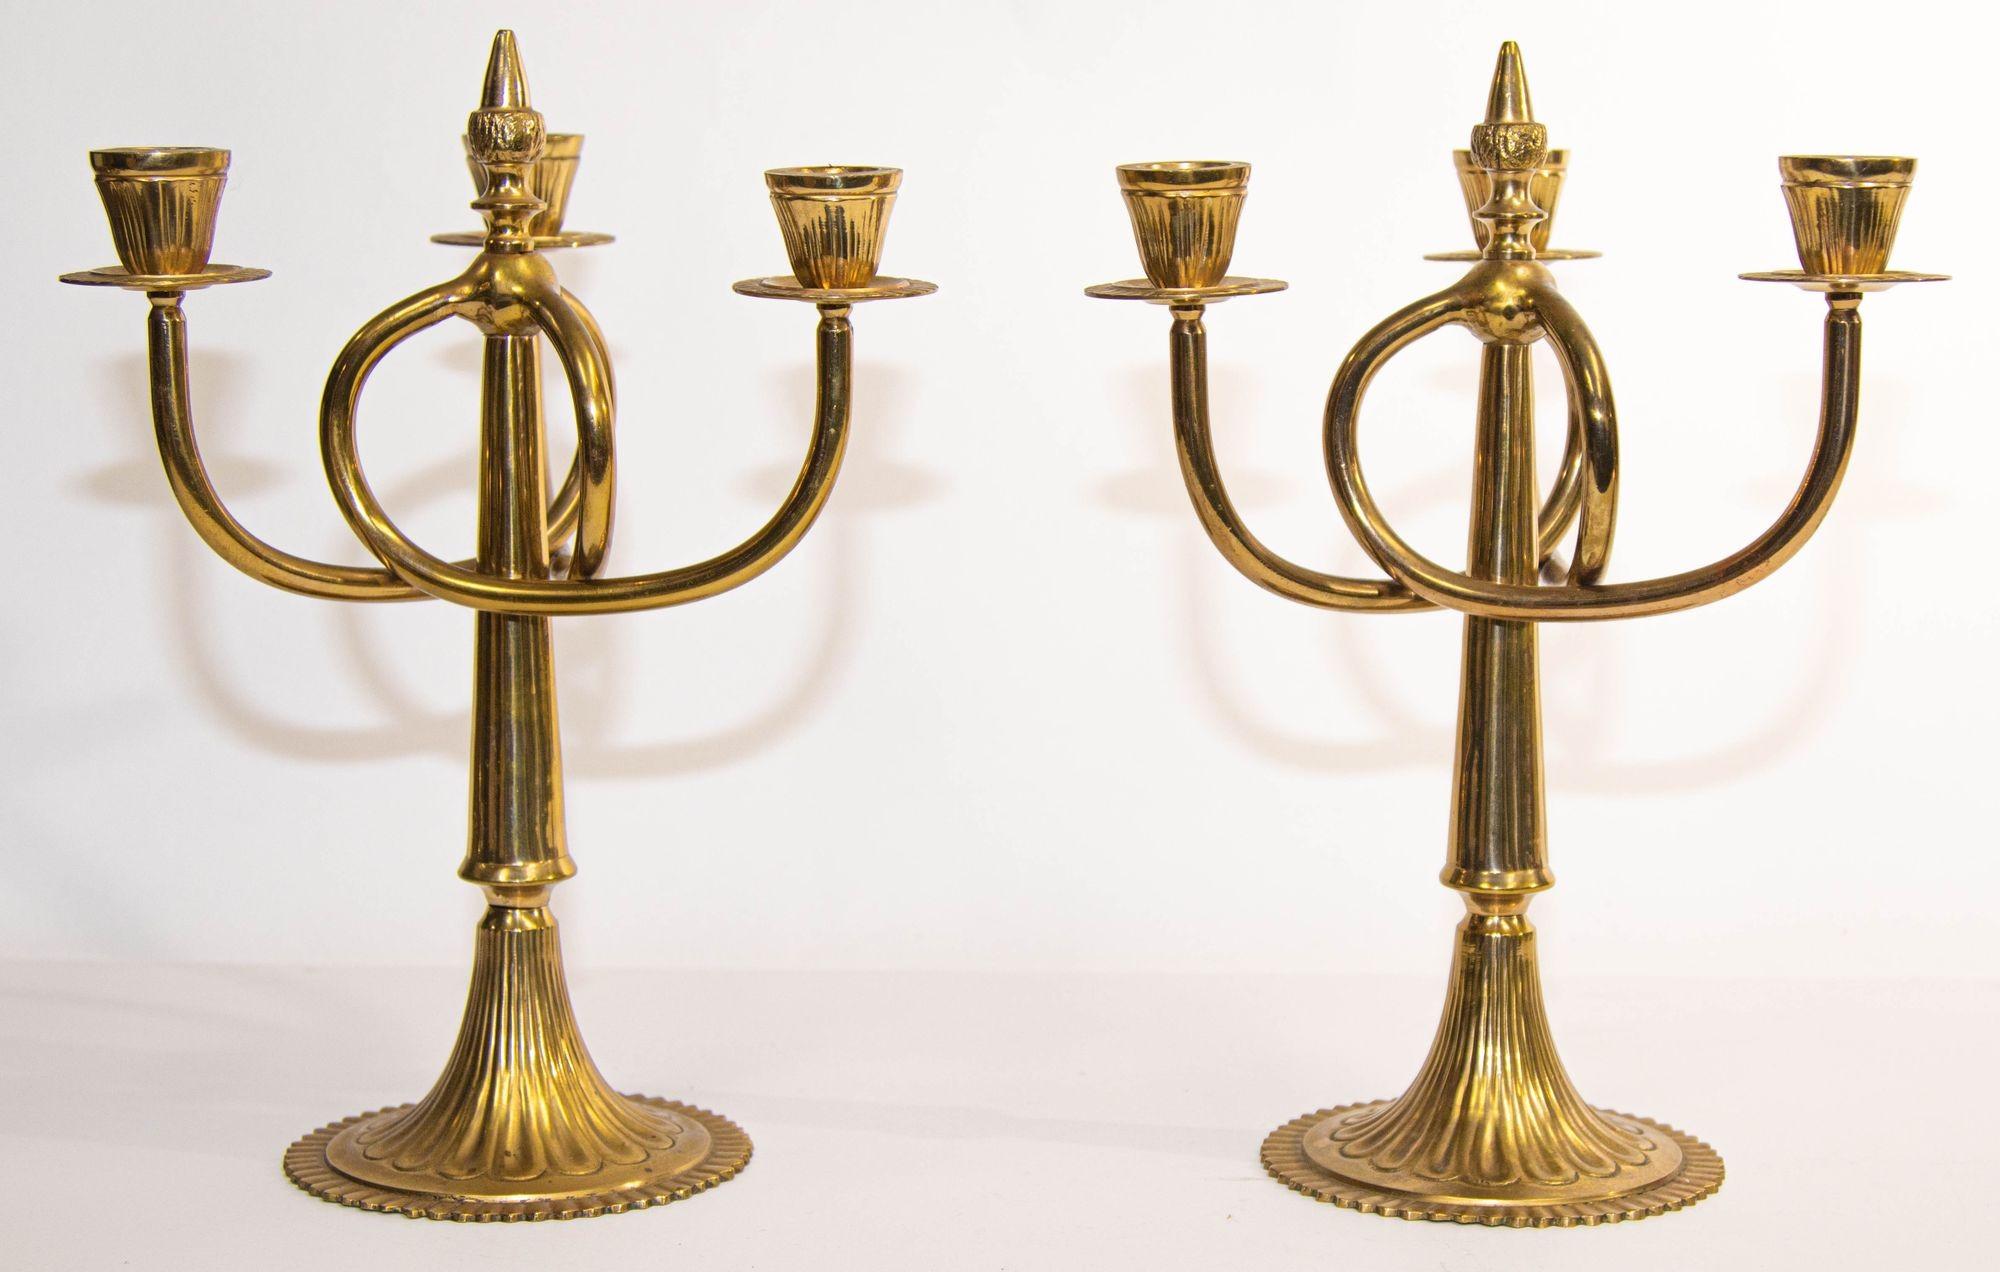 Beautiful Pair of Art Nouveau style solid brass candelabras with three branches with bobeches.
Fantastic large size organic brass candle holder or candelabra with twisting arms.
A stunning pair of mid 20th century twisted branch three arms